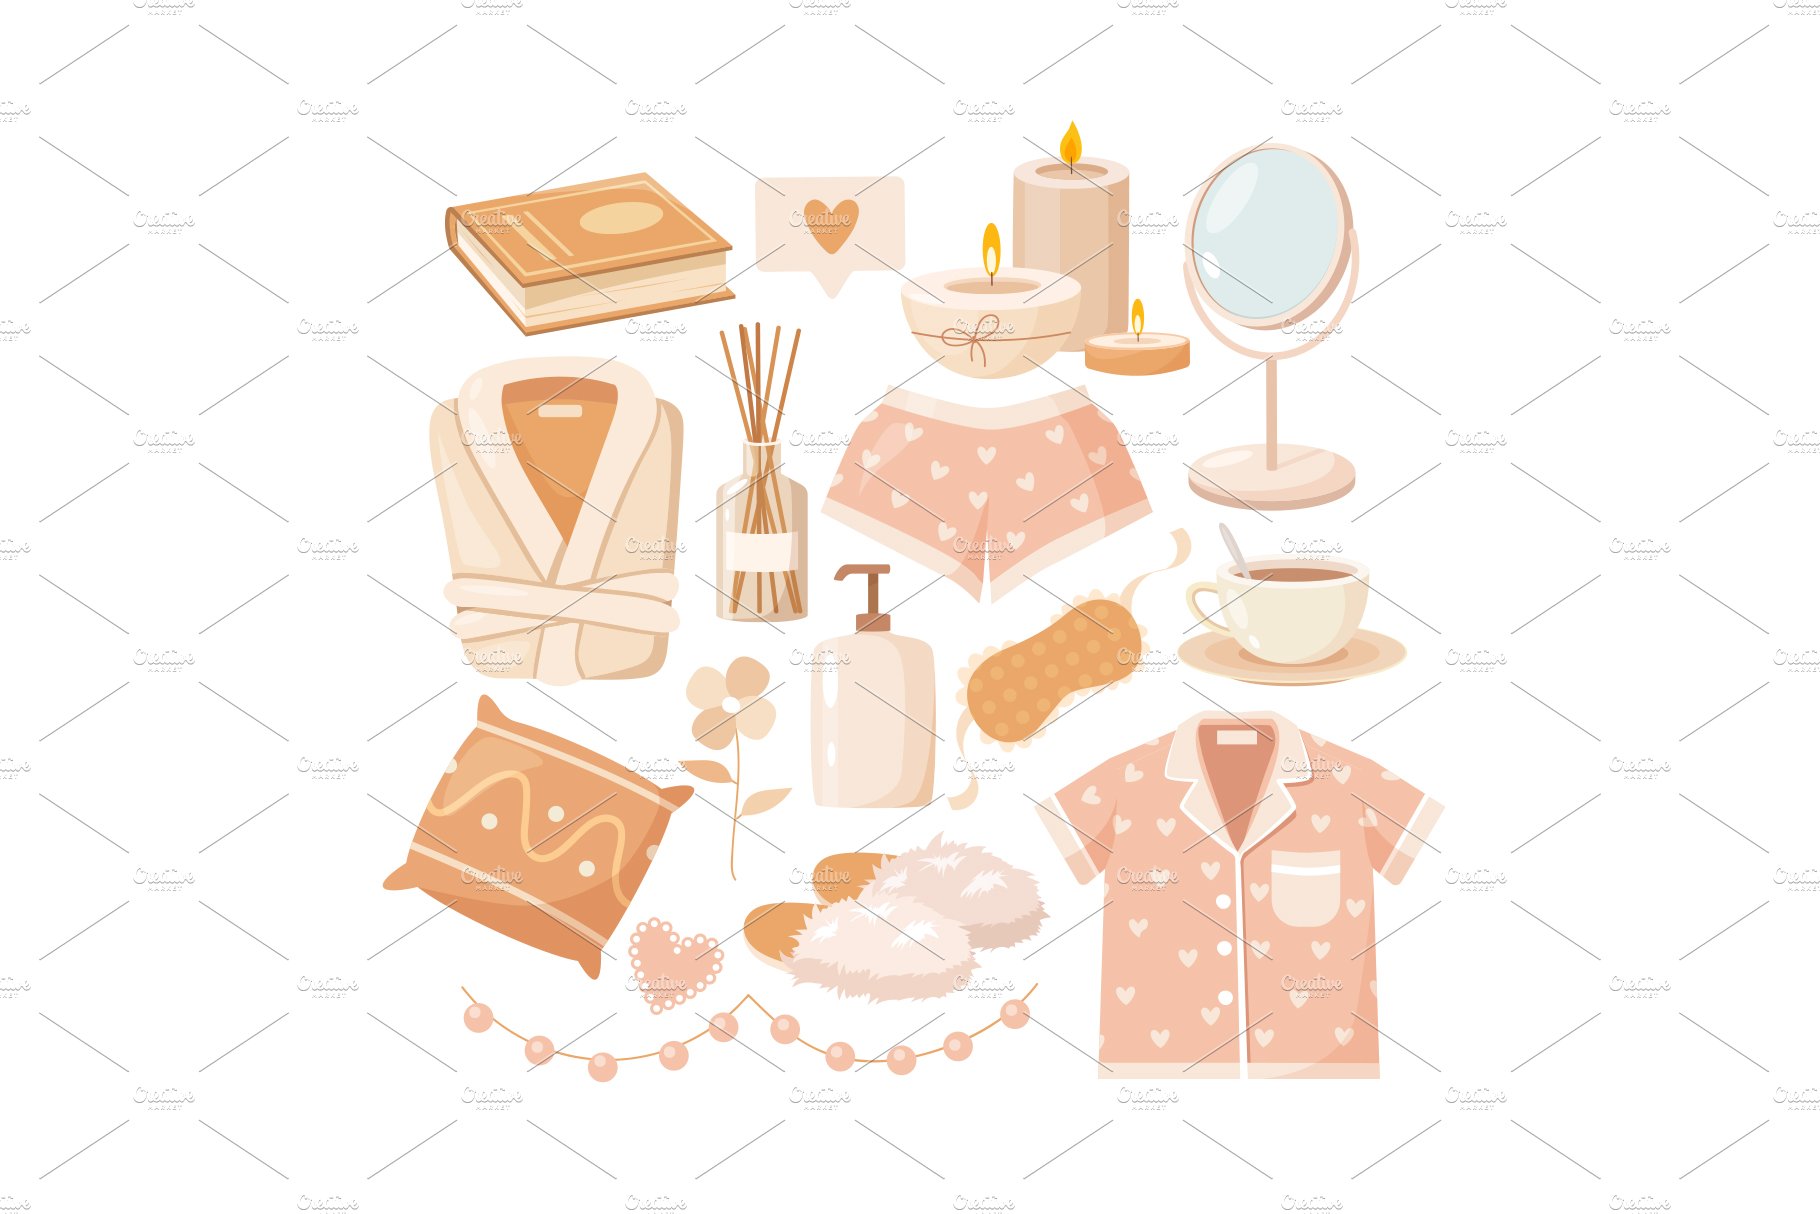 Collection of symbols for relax time cover image.